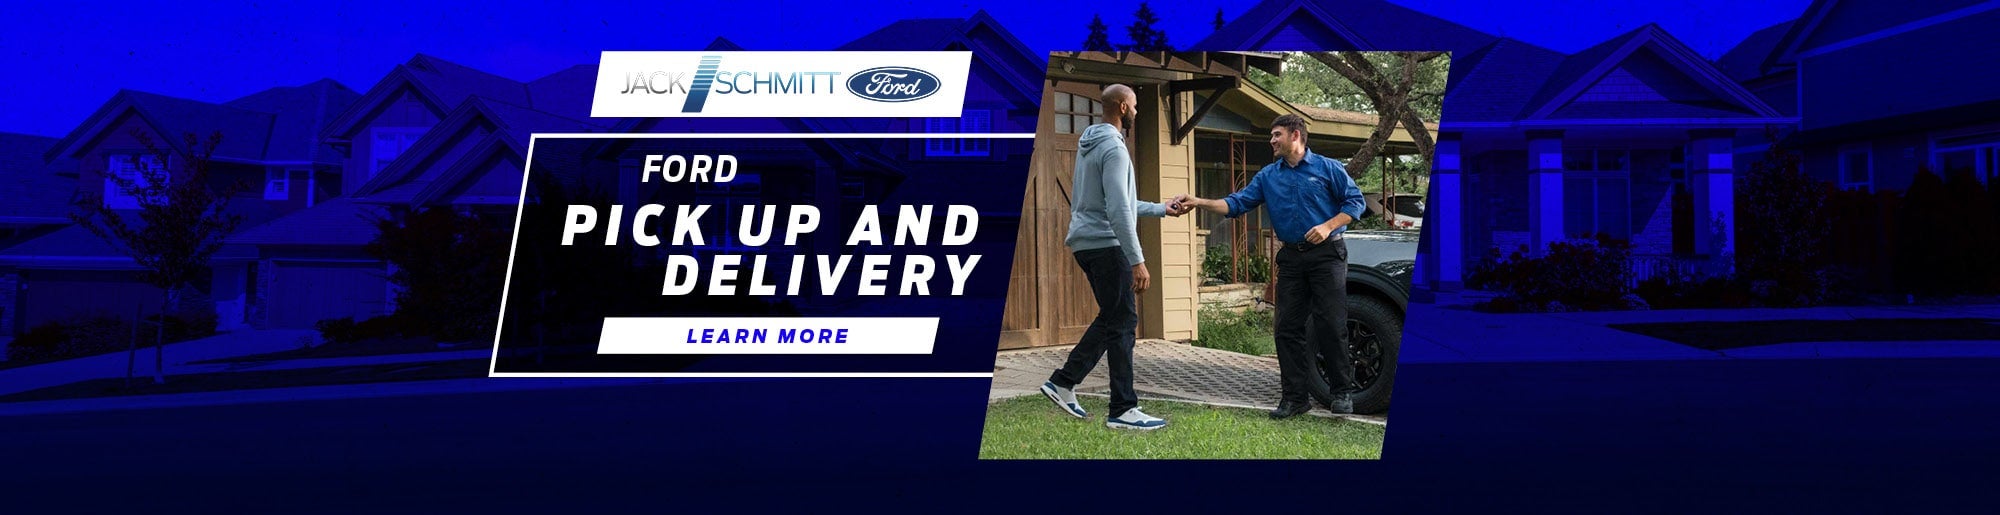 Pick Up and Delivery at Jack Schmitt Ford of Collinsville Collinsville IL 